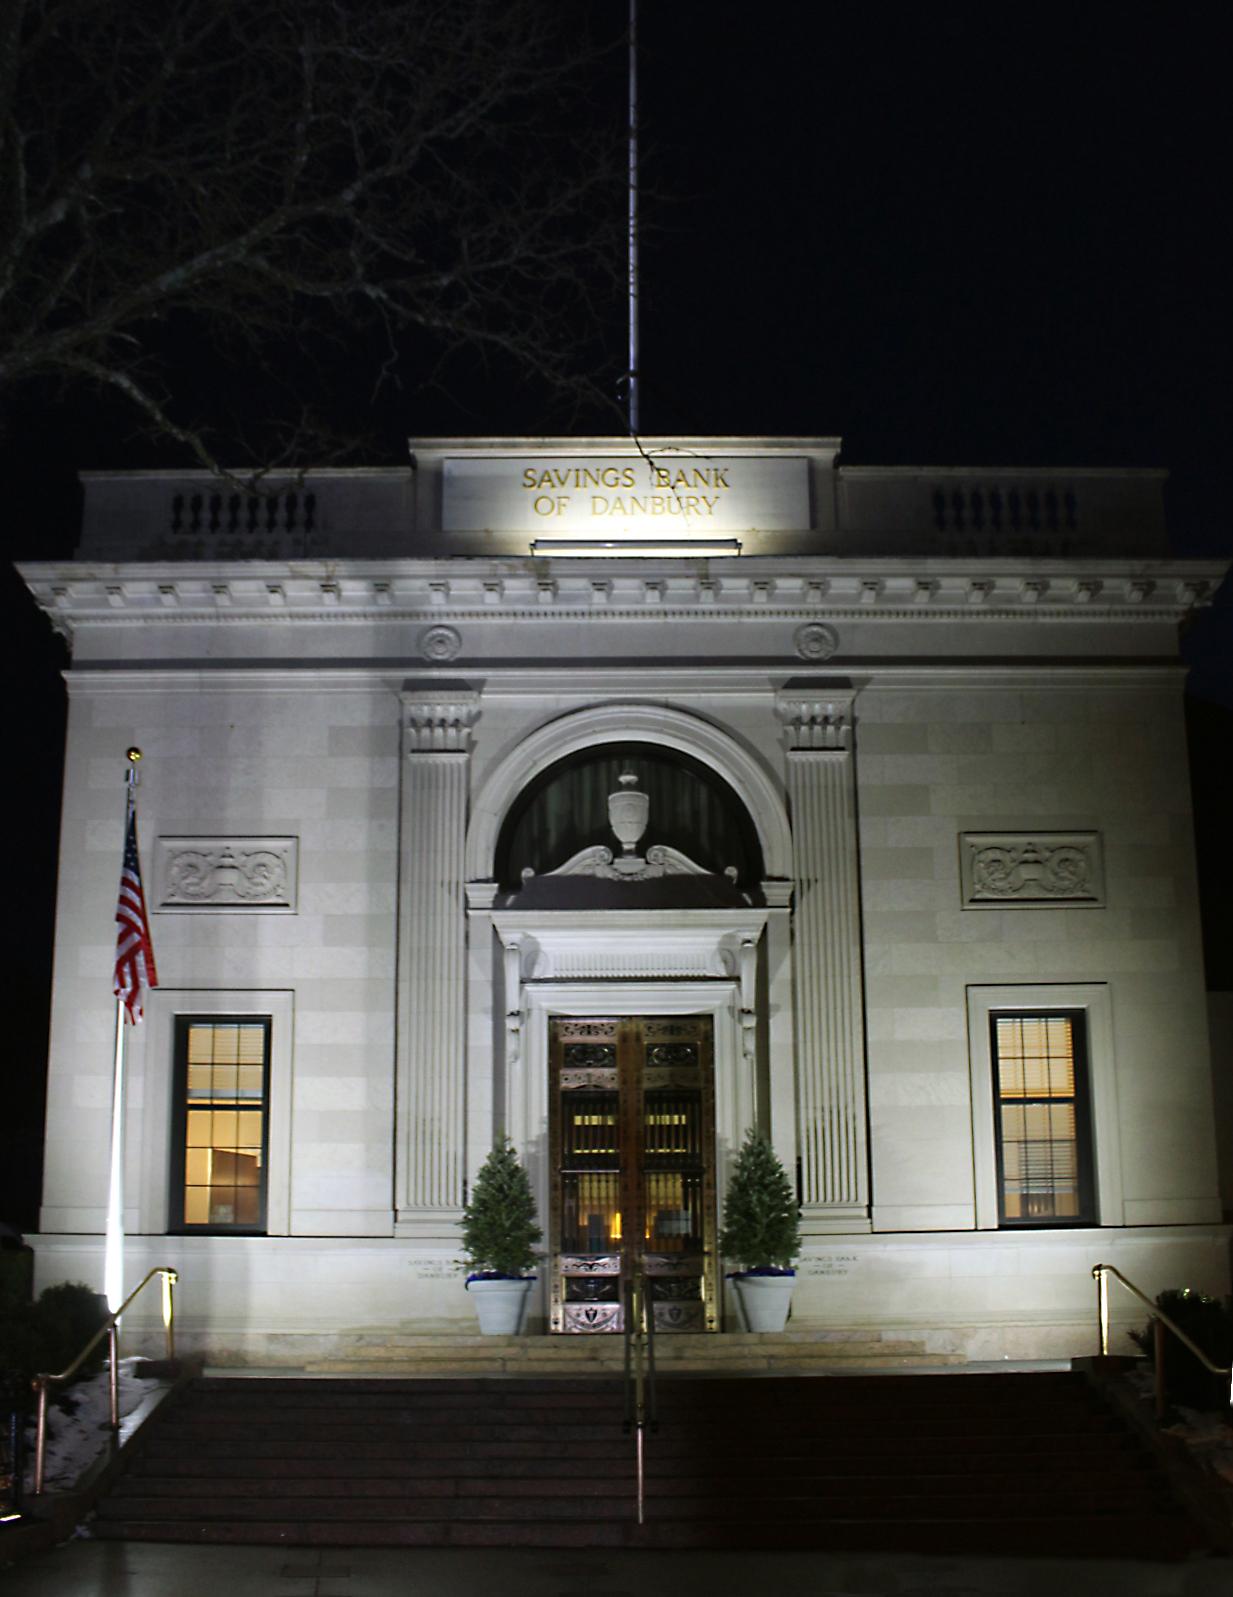 Savings Bank of Danbury to be featured in documentary